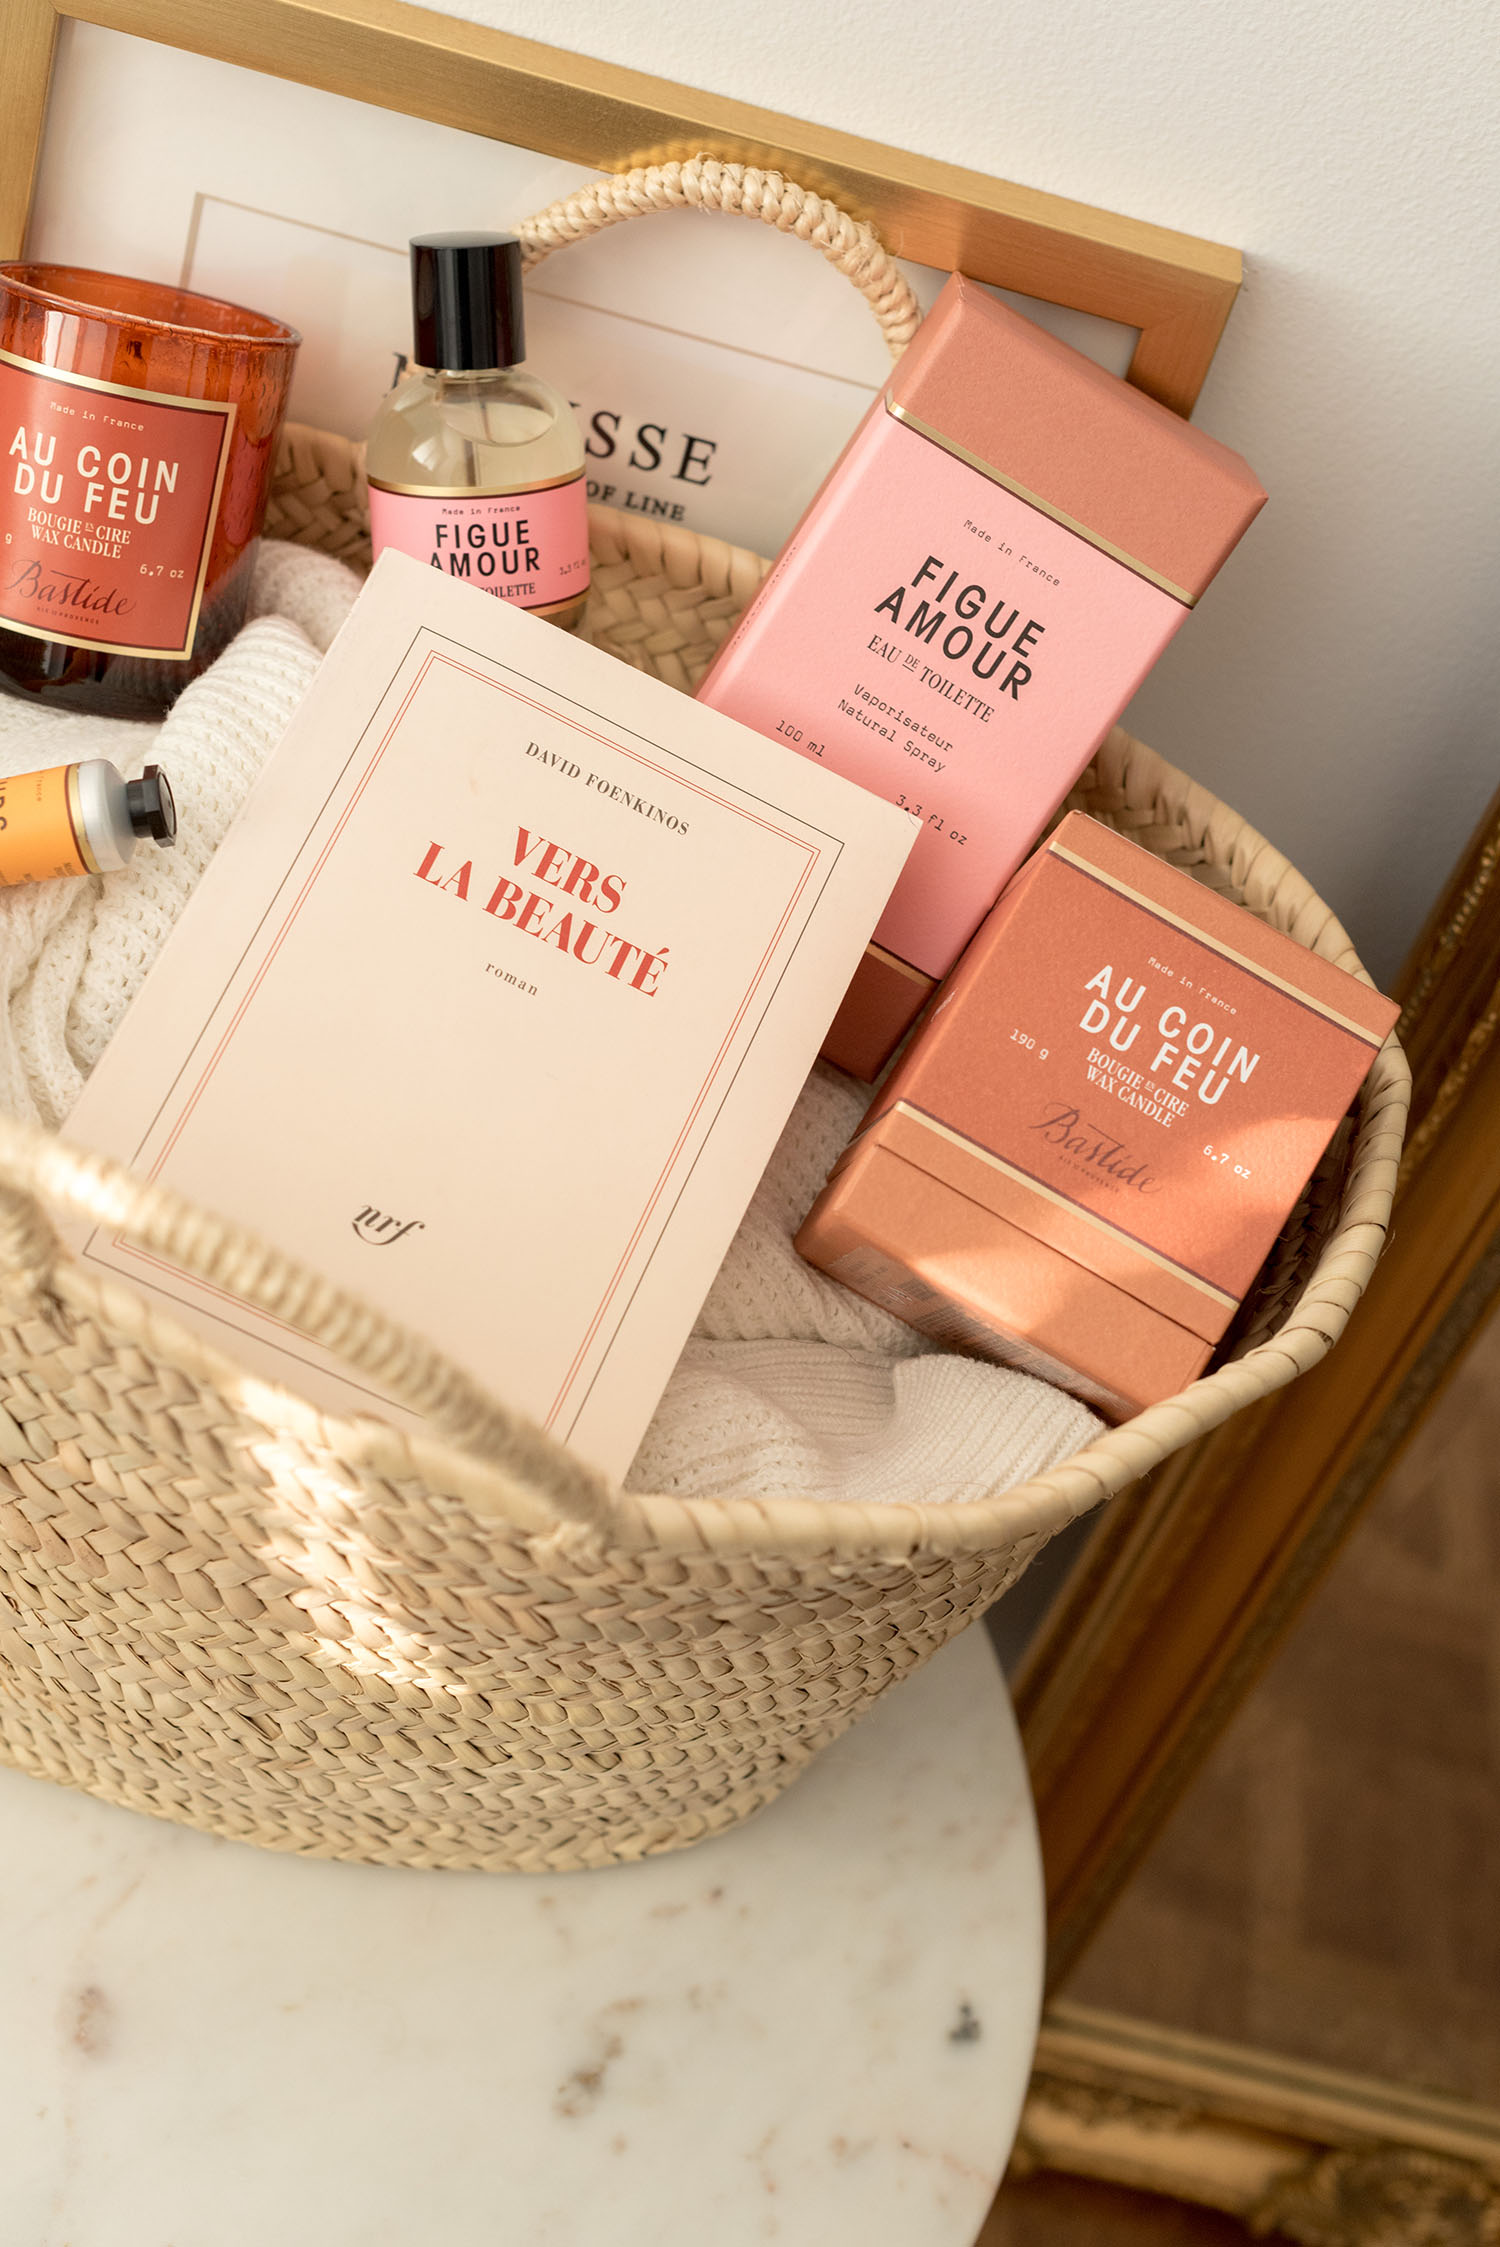 Bastide beauty products in a straw basket, as captured by top Canadian beauty blogger Cee Fardoe of Coco & Vera